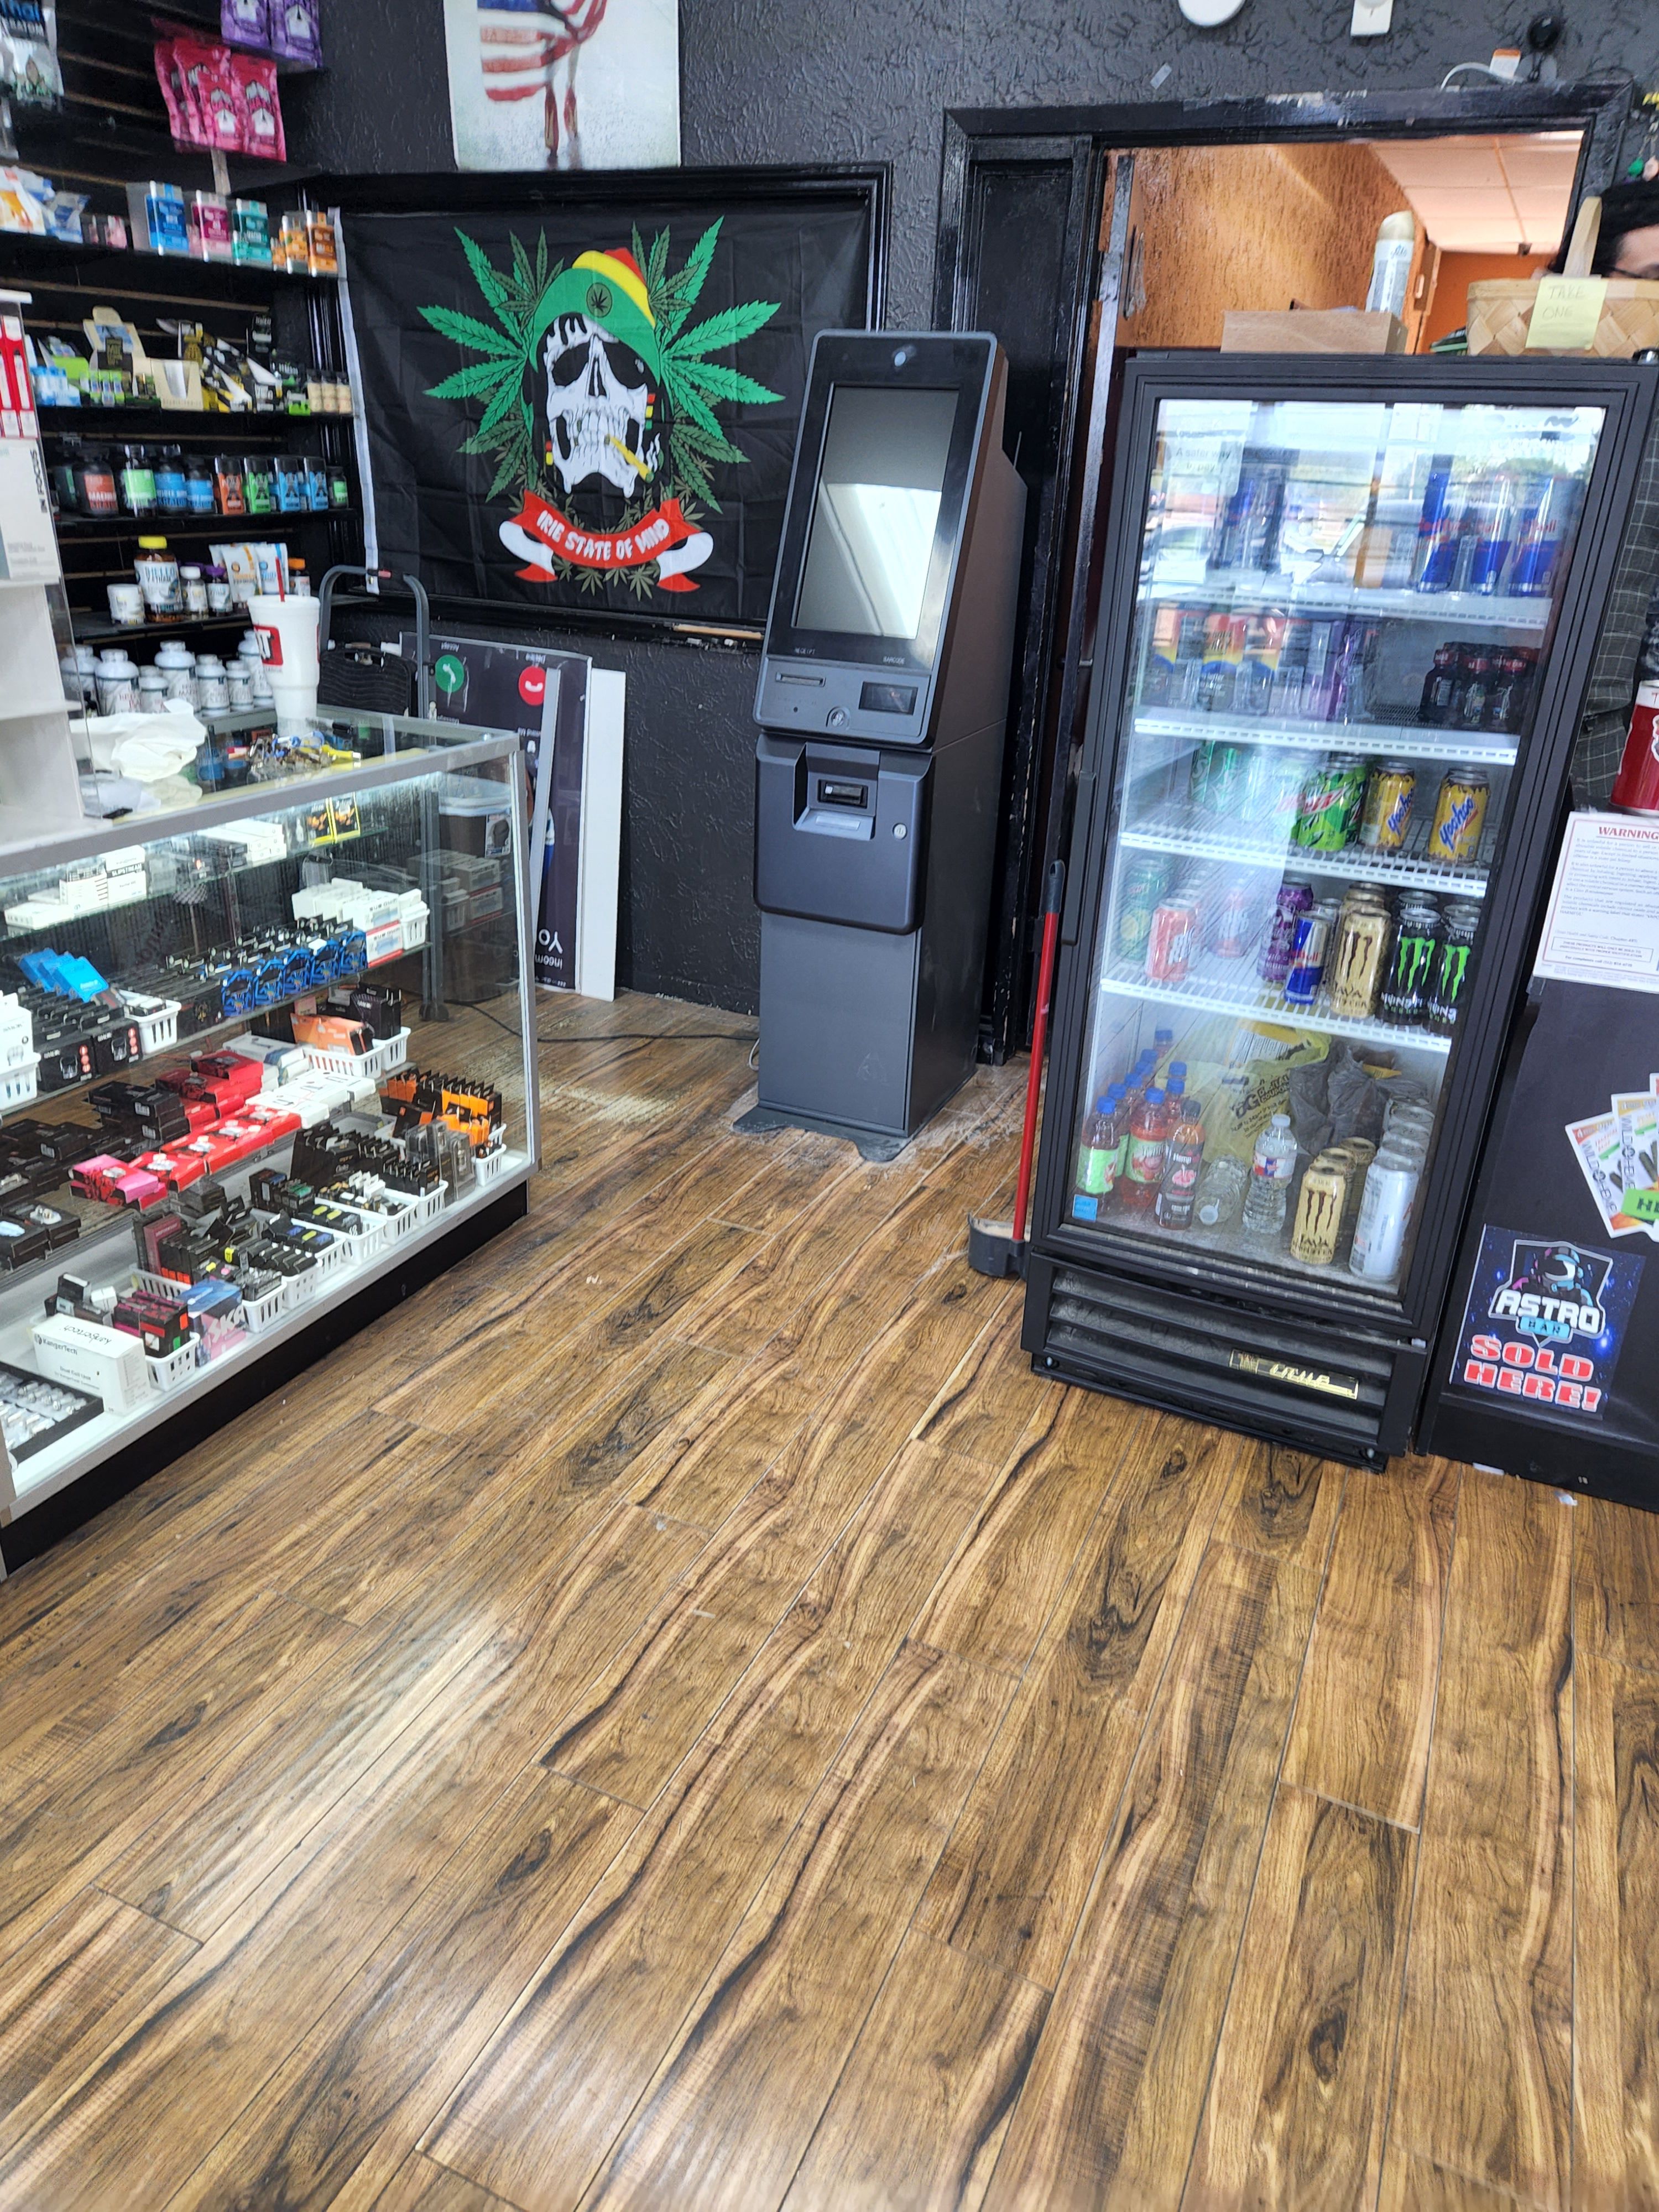 Getcoins - Bitcoin ATM - Inside of Smoke Club in Mesquite, Texas